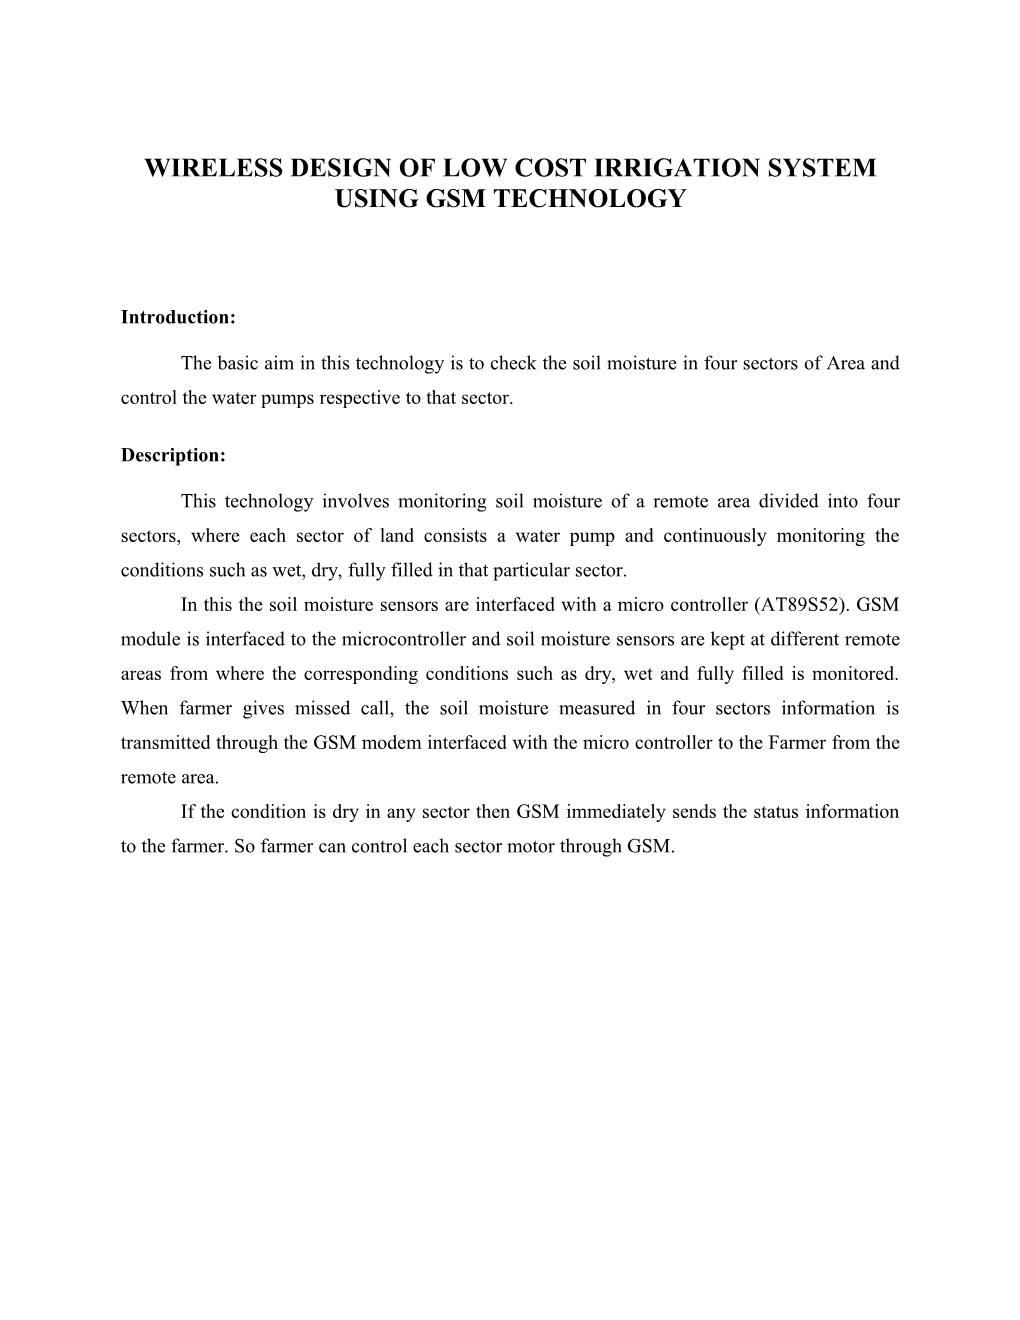 Wireless Design of Low Cost Irrigation System Using Gsm Technology